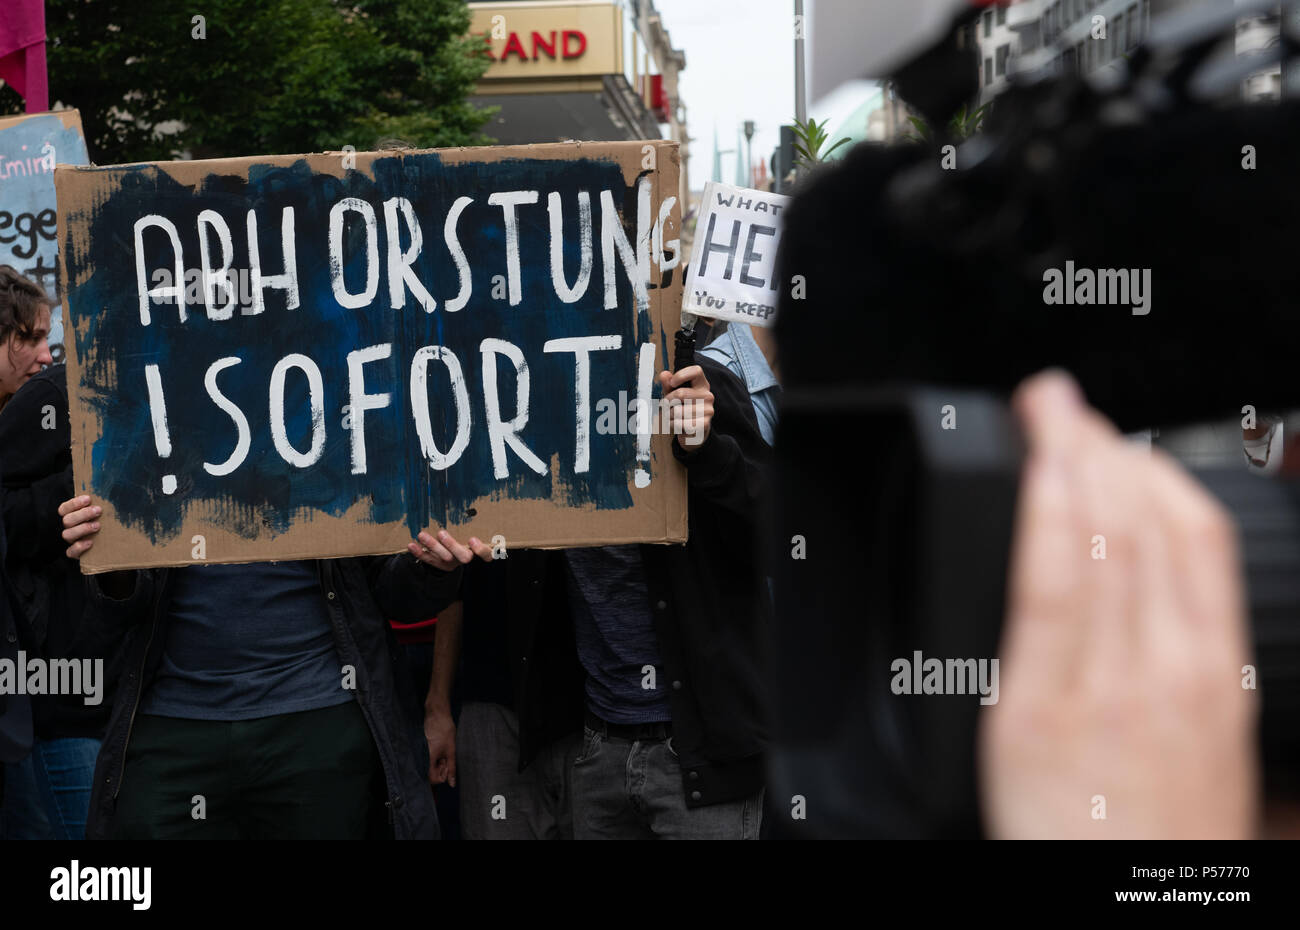 Berlin, Germany. 25th June, 2018. A protestor carrying a sign that reads 'Abhorstung! Sofort' (lit. dehorstation! now; play on words) stands outside the Bavarian state representation. More than 200 people protest against the planned refugee policy of Seehofer of the Christian Social Union (CSU), German Minister of the Interior, Homeland and Building. Credit: Paul Zinken/dpa/Alamy Live News Stock Photo